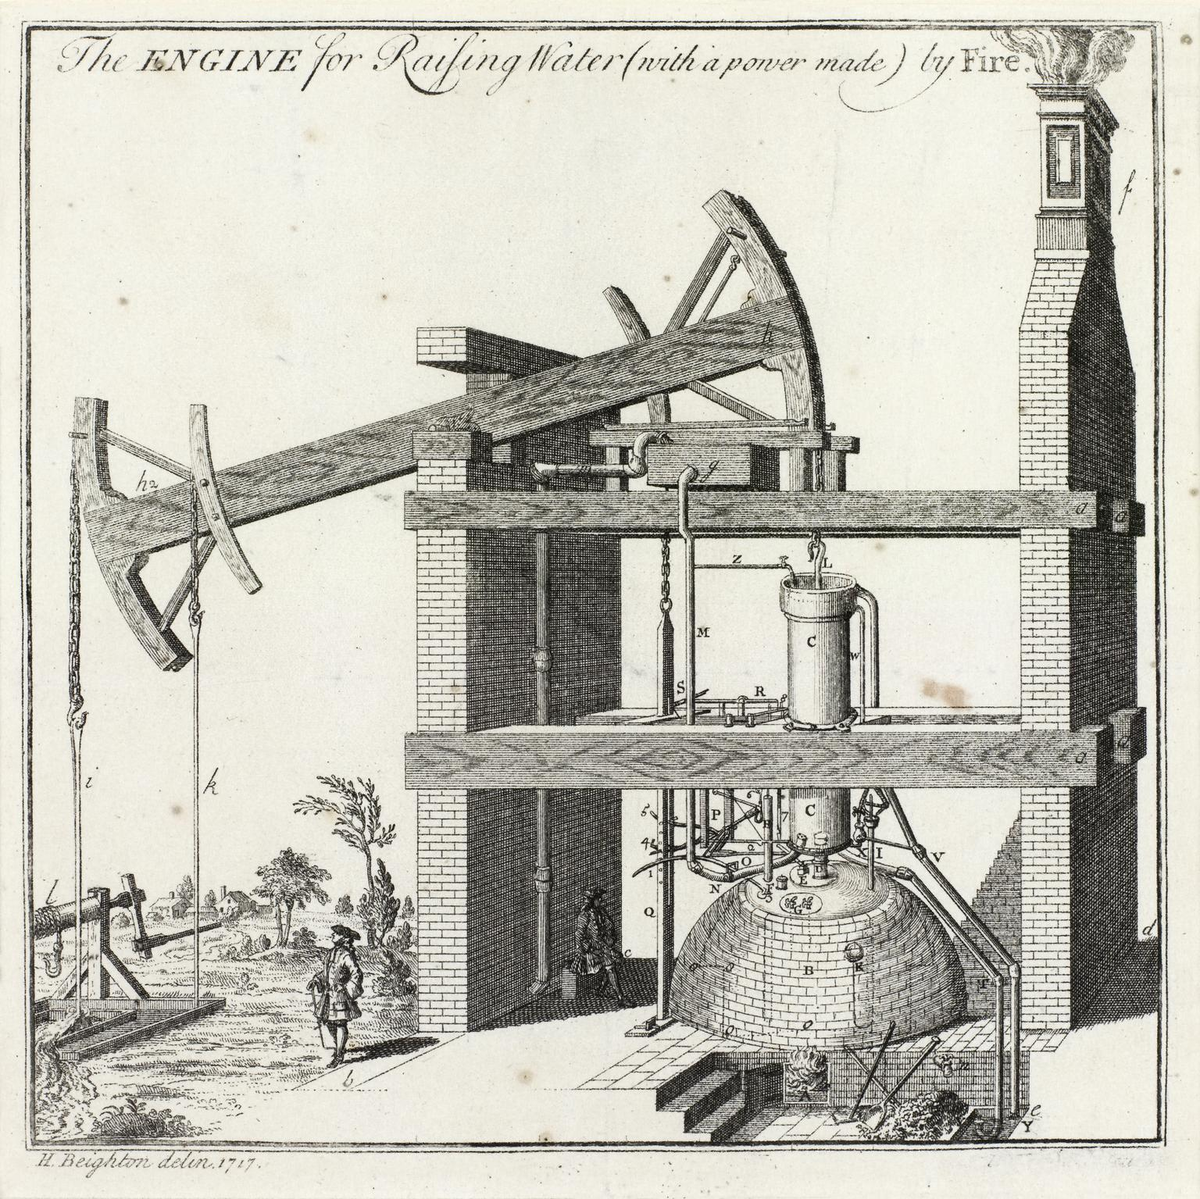 Who invented the steam engine?The usual answer focuses on British inventors like Thomas Newcomen, or Thomas Savery. They were both active in the late 17thC.But there's also a much earlier, Spanish claimant... (Thread)  https://antonhowes.substack.com/p/age-of-invention-the-spanish-engine